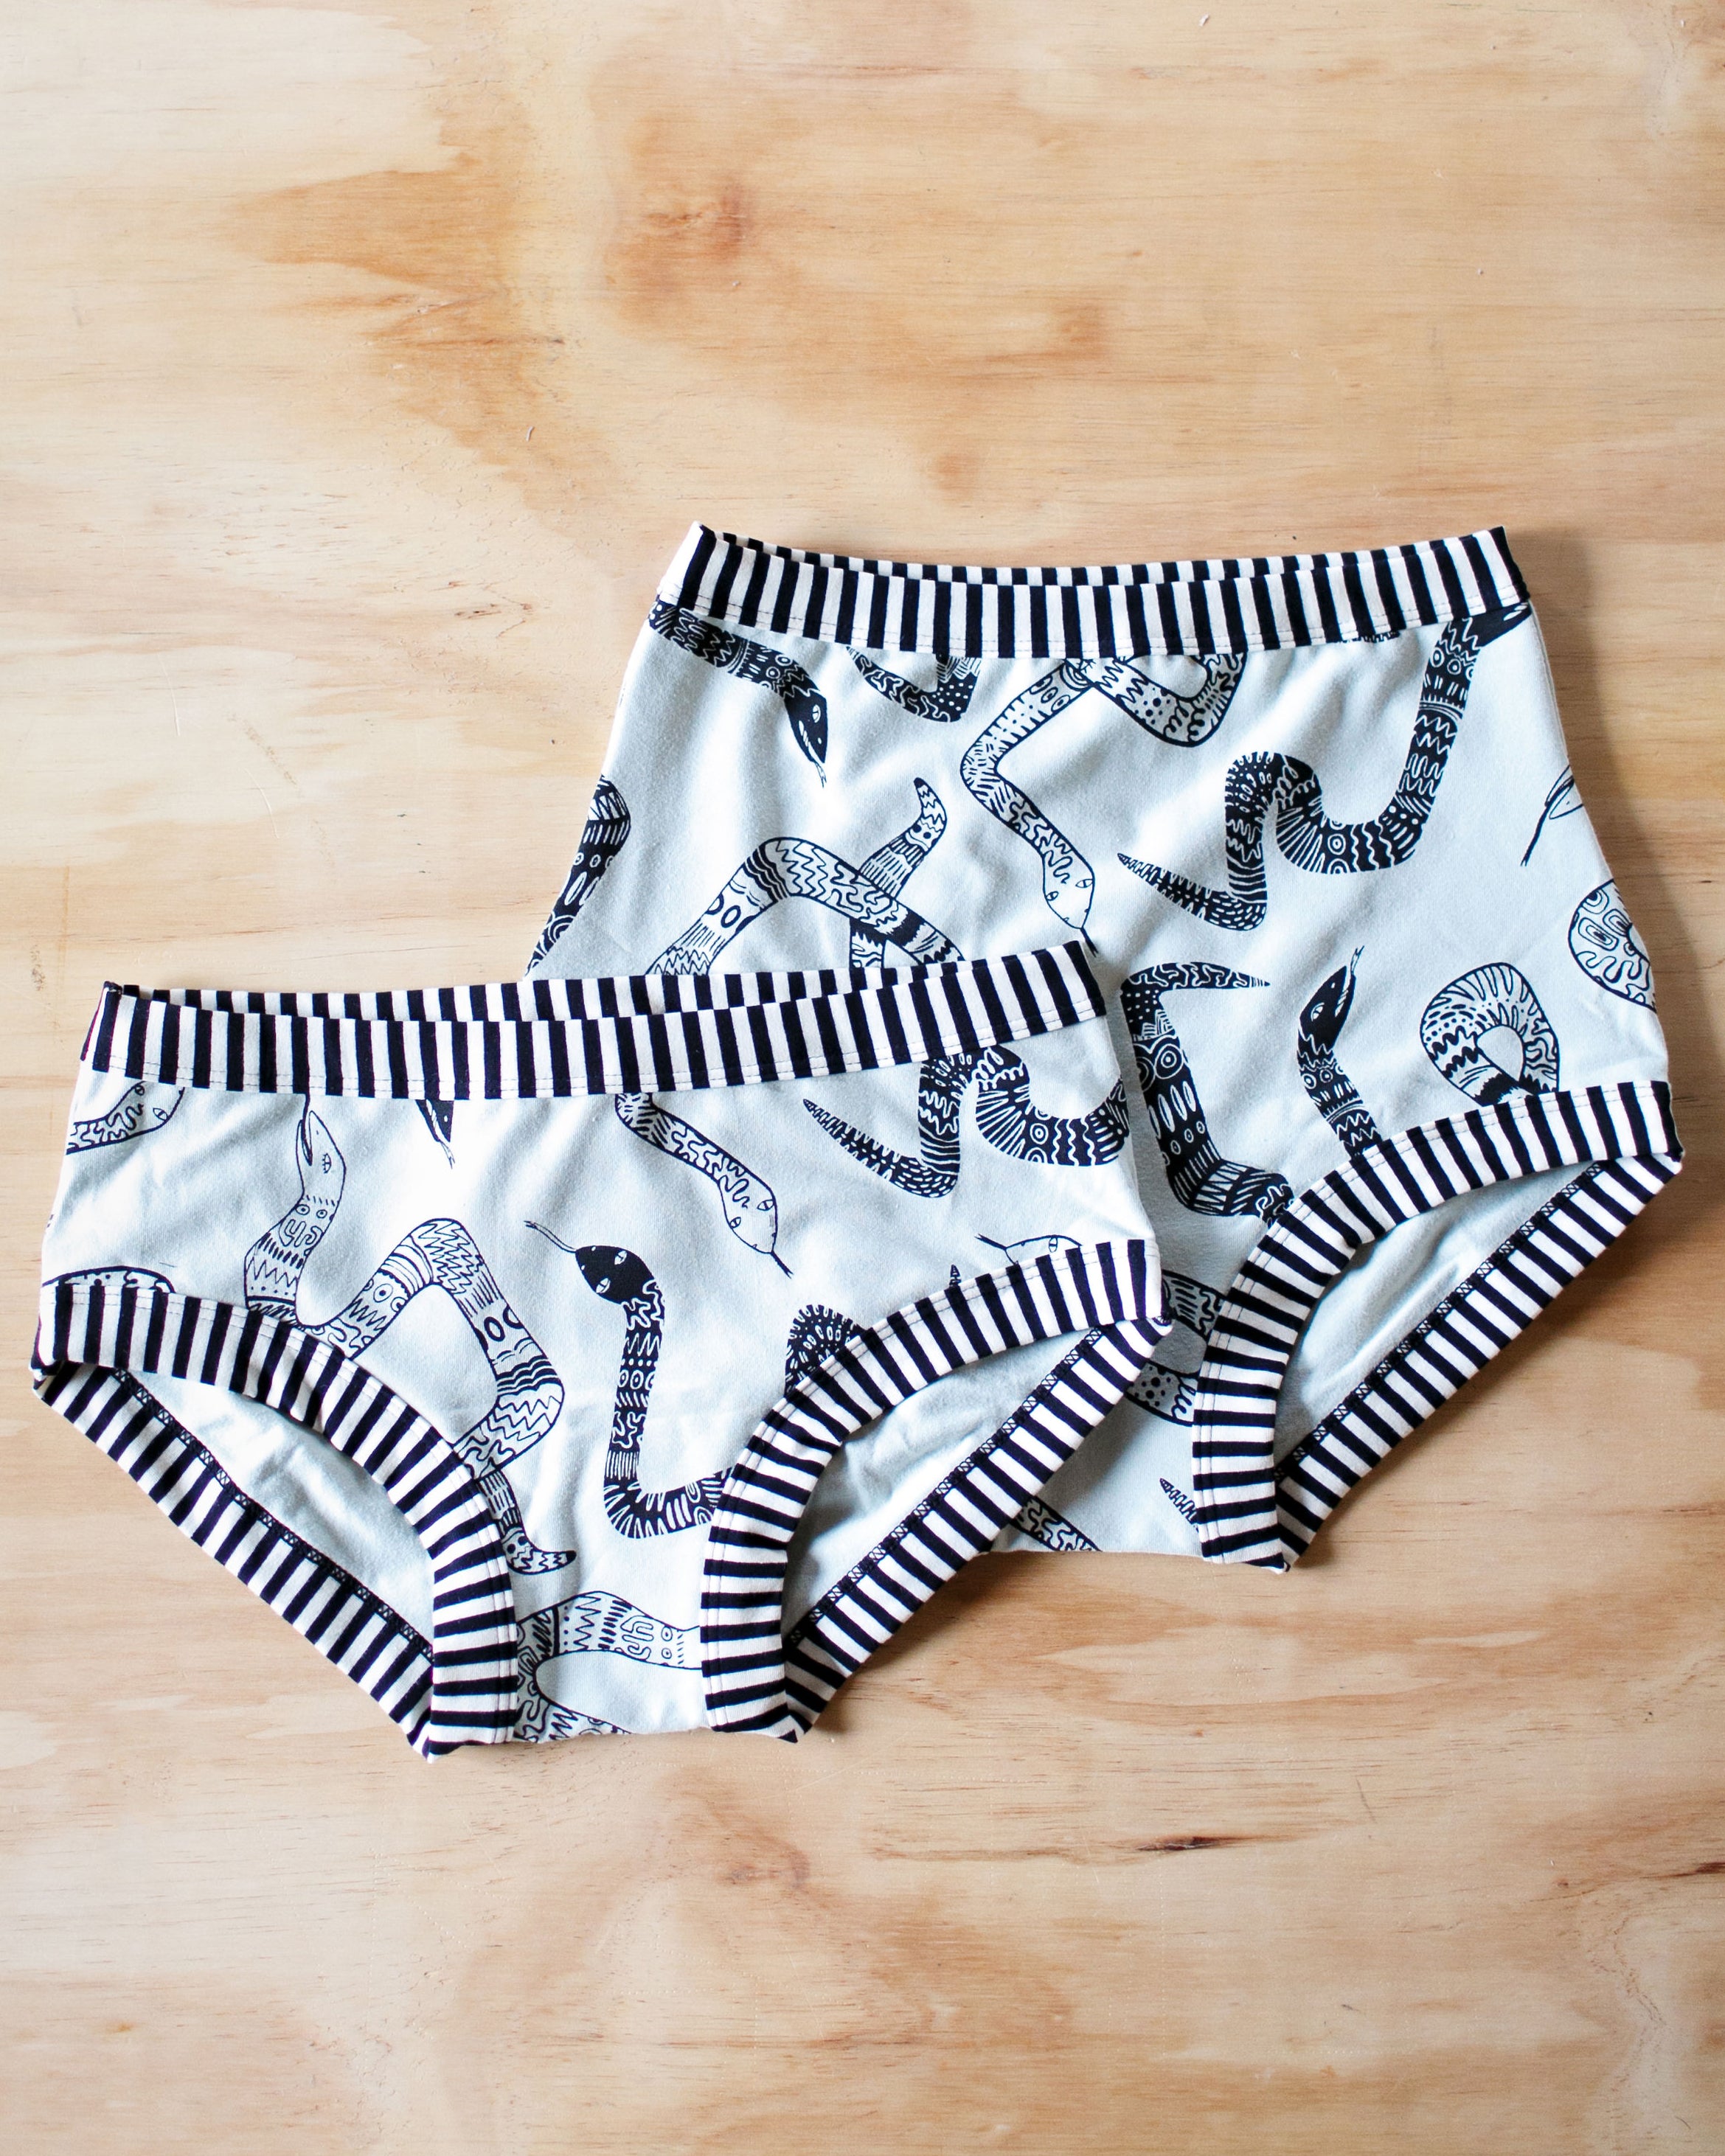 Flat lay with Thunderpants organic cotton Sky Rise style and Hipster style underwear in Sketchy Snakes: sage color with black sketched snakes and black and white stripe binding.